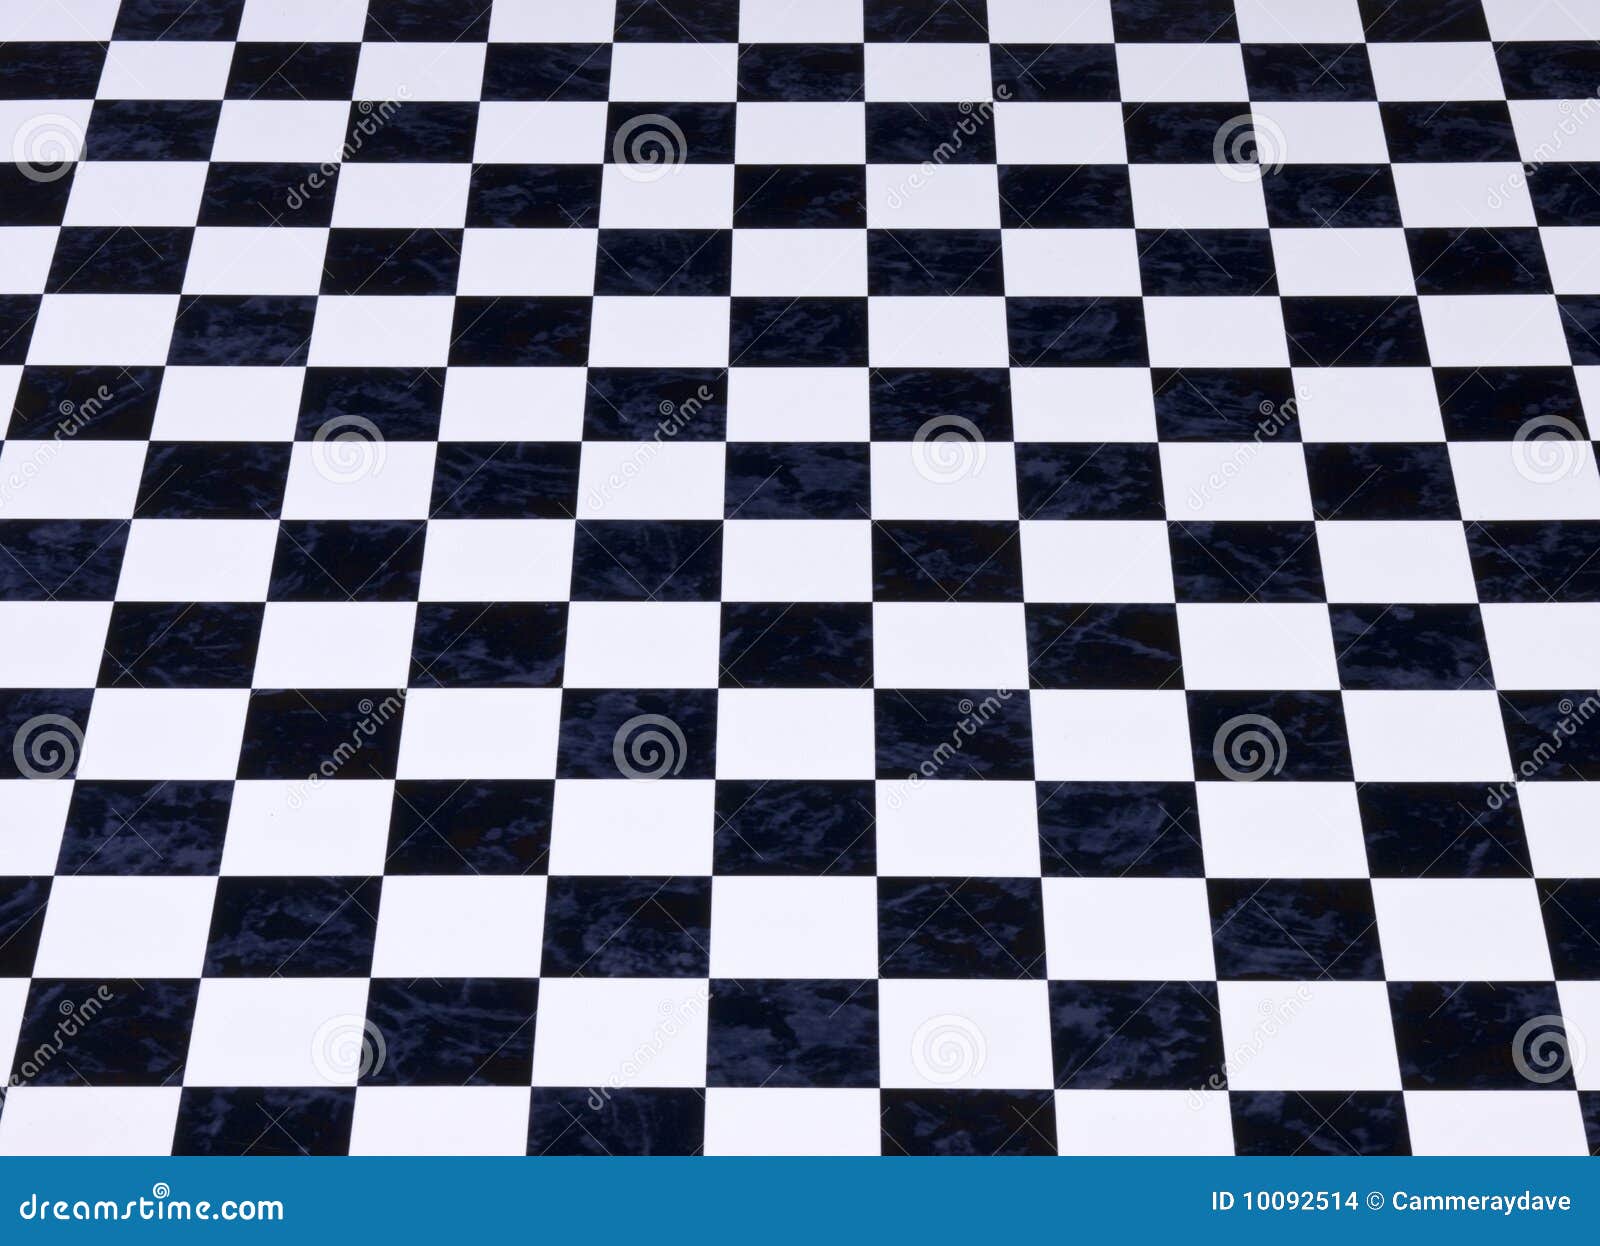 marble checkered checkerboard background